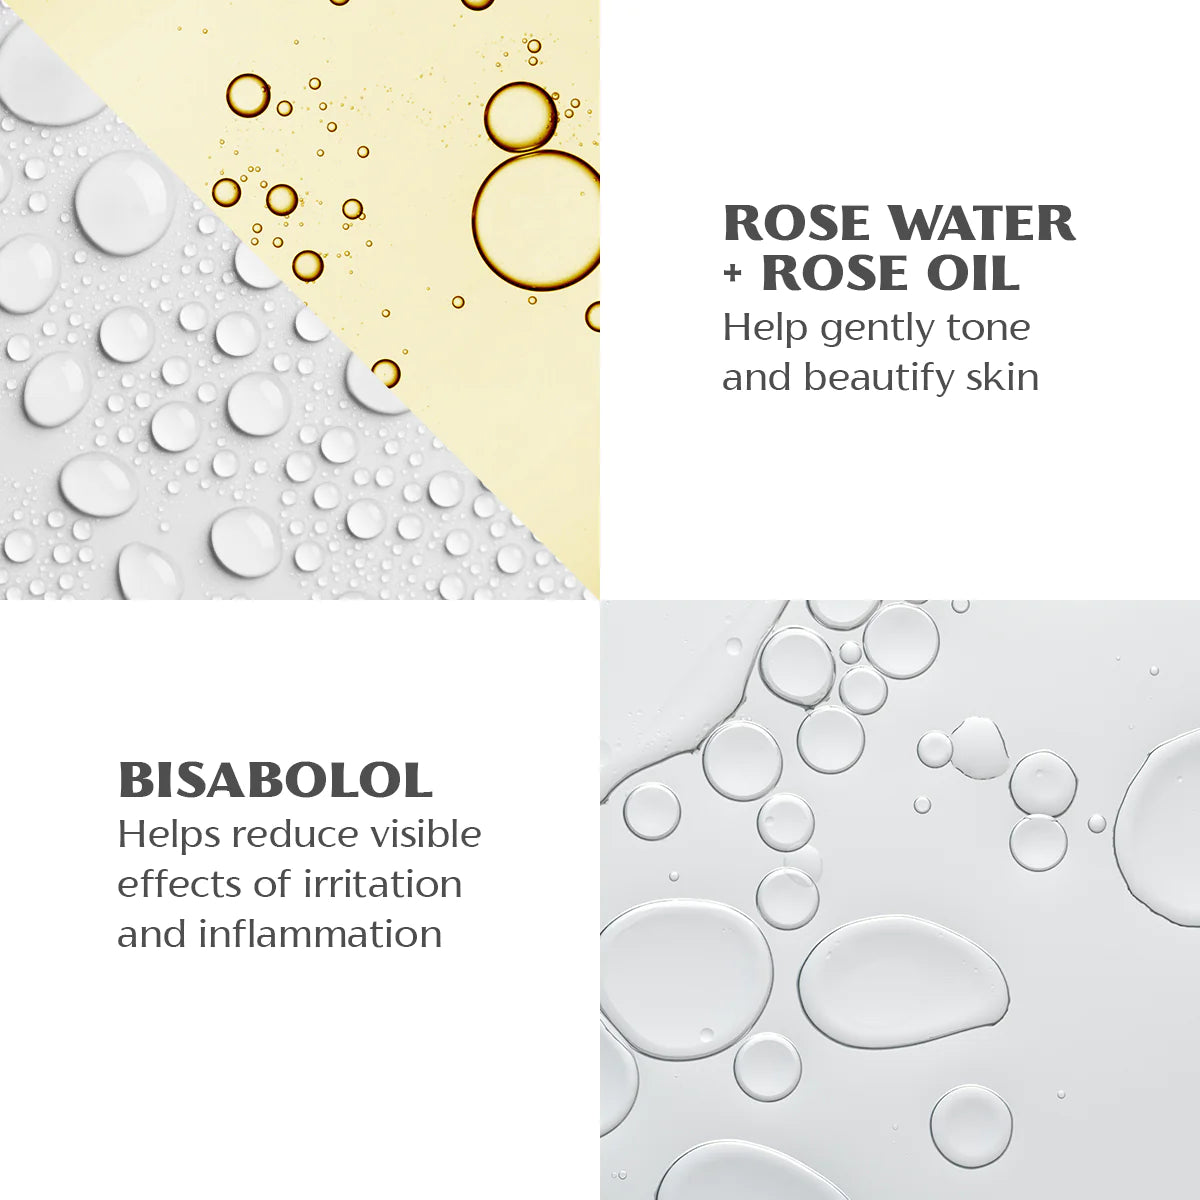 Explore our Rose Otto Facial Toner Bio Damascena that includes four different types of rose water and rose oil to enhance your skincare routine.